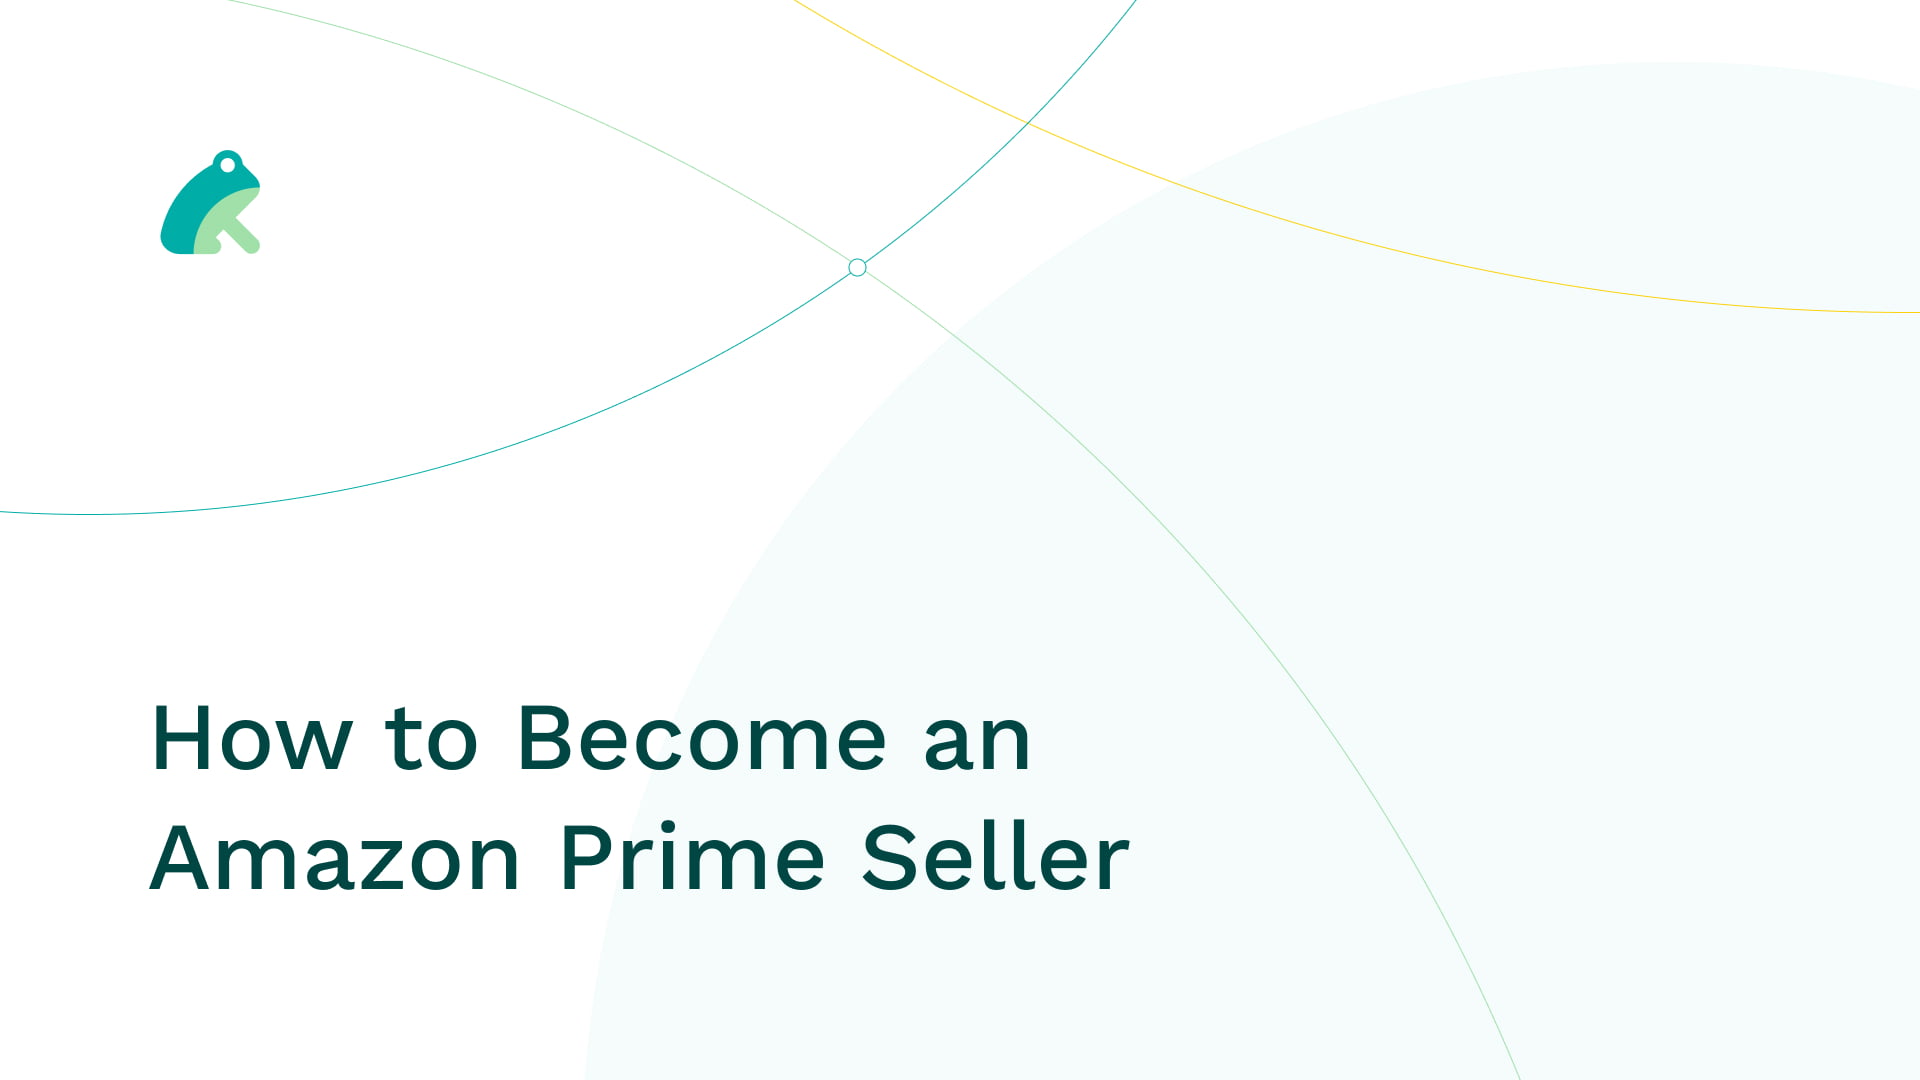 How to Become an Amazon Prime Seller